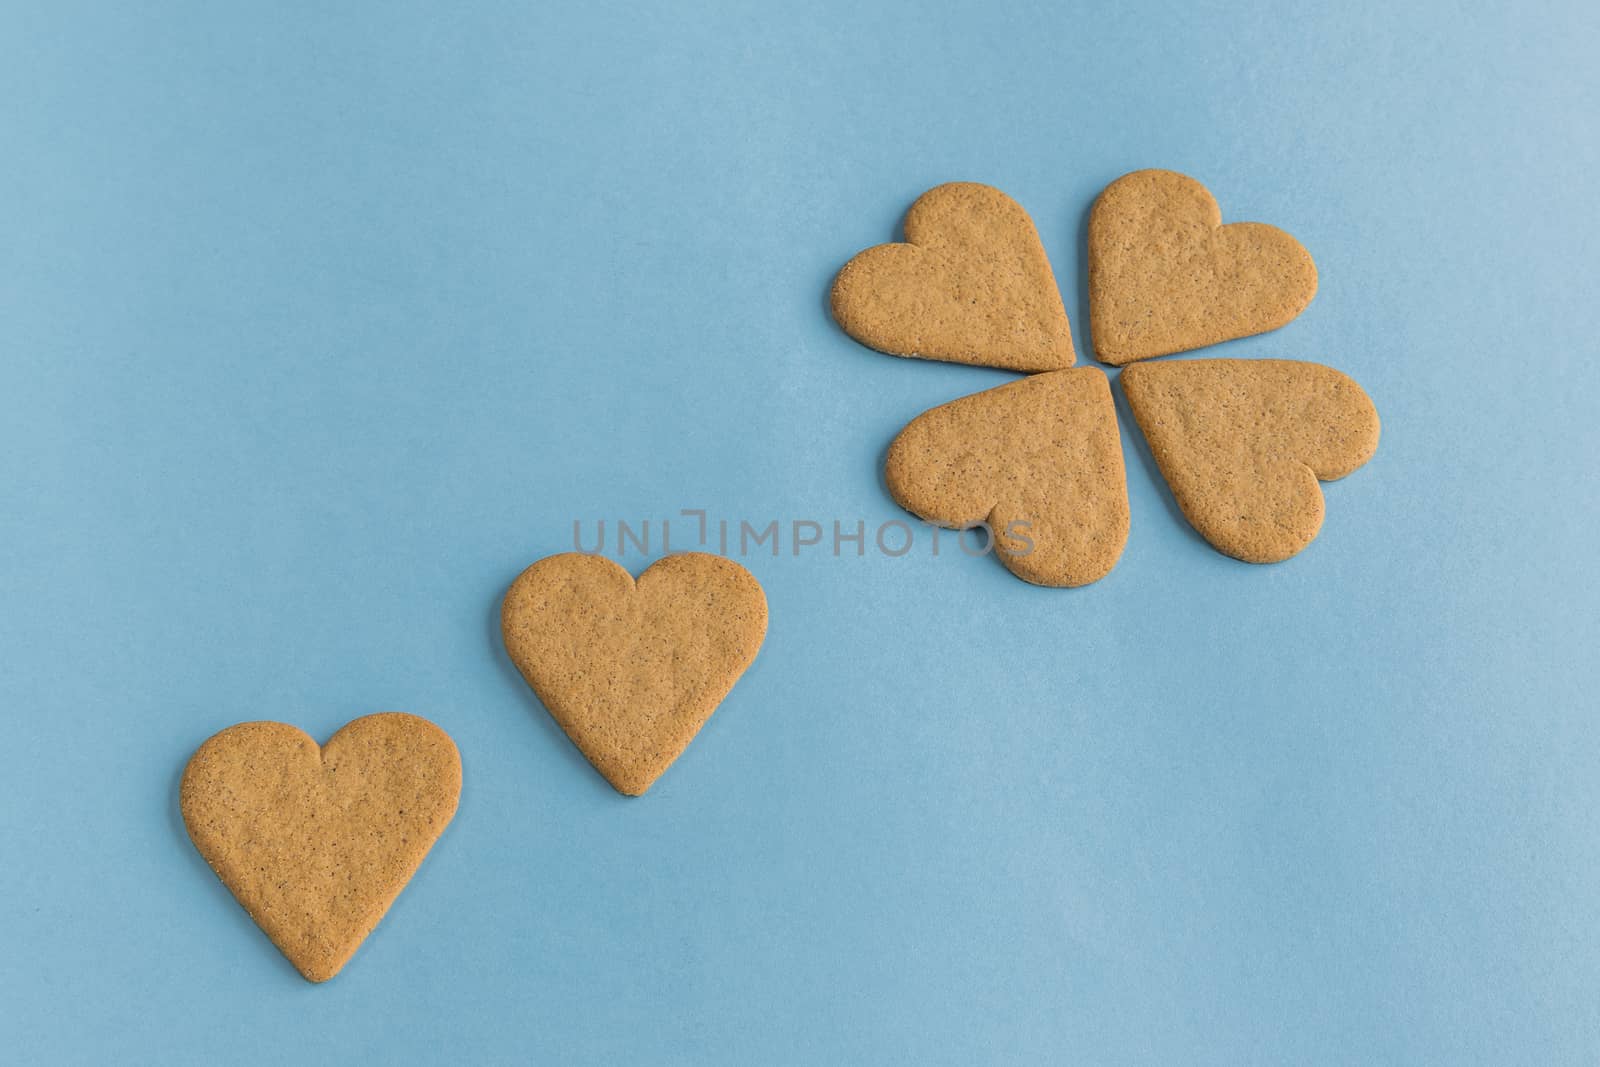 Breakfast. Heart shaped cookies. Blue background. Copy space. Top view. by JRPazos